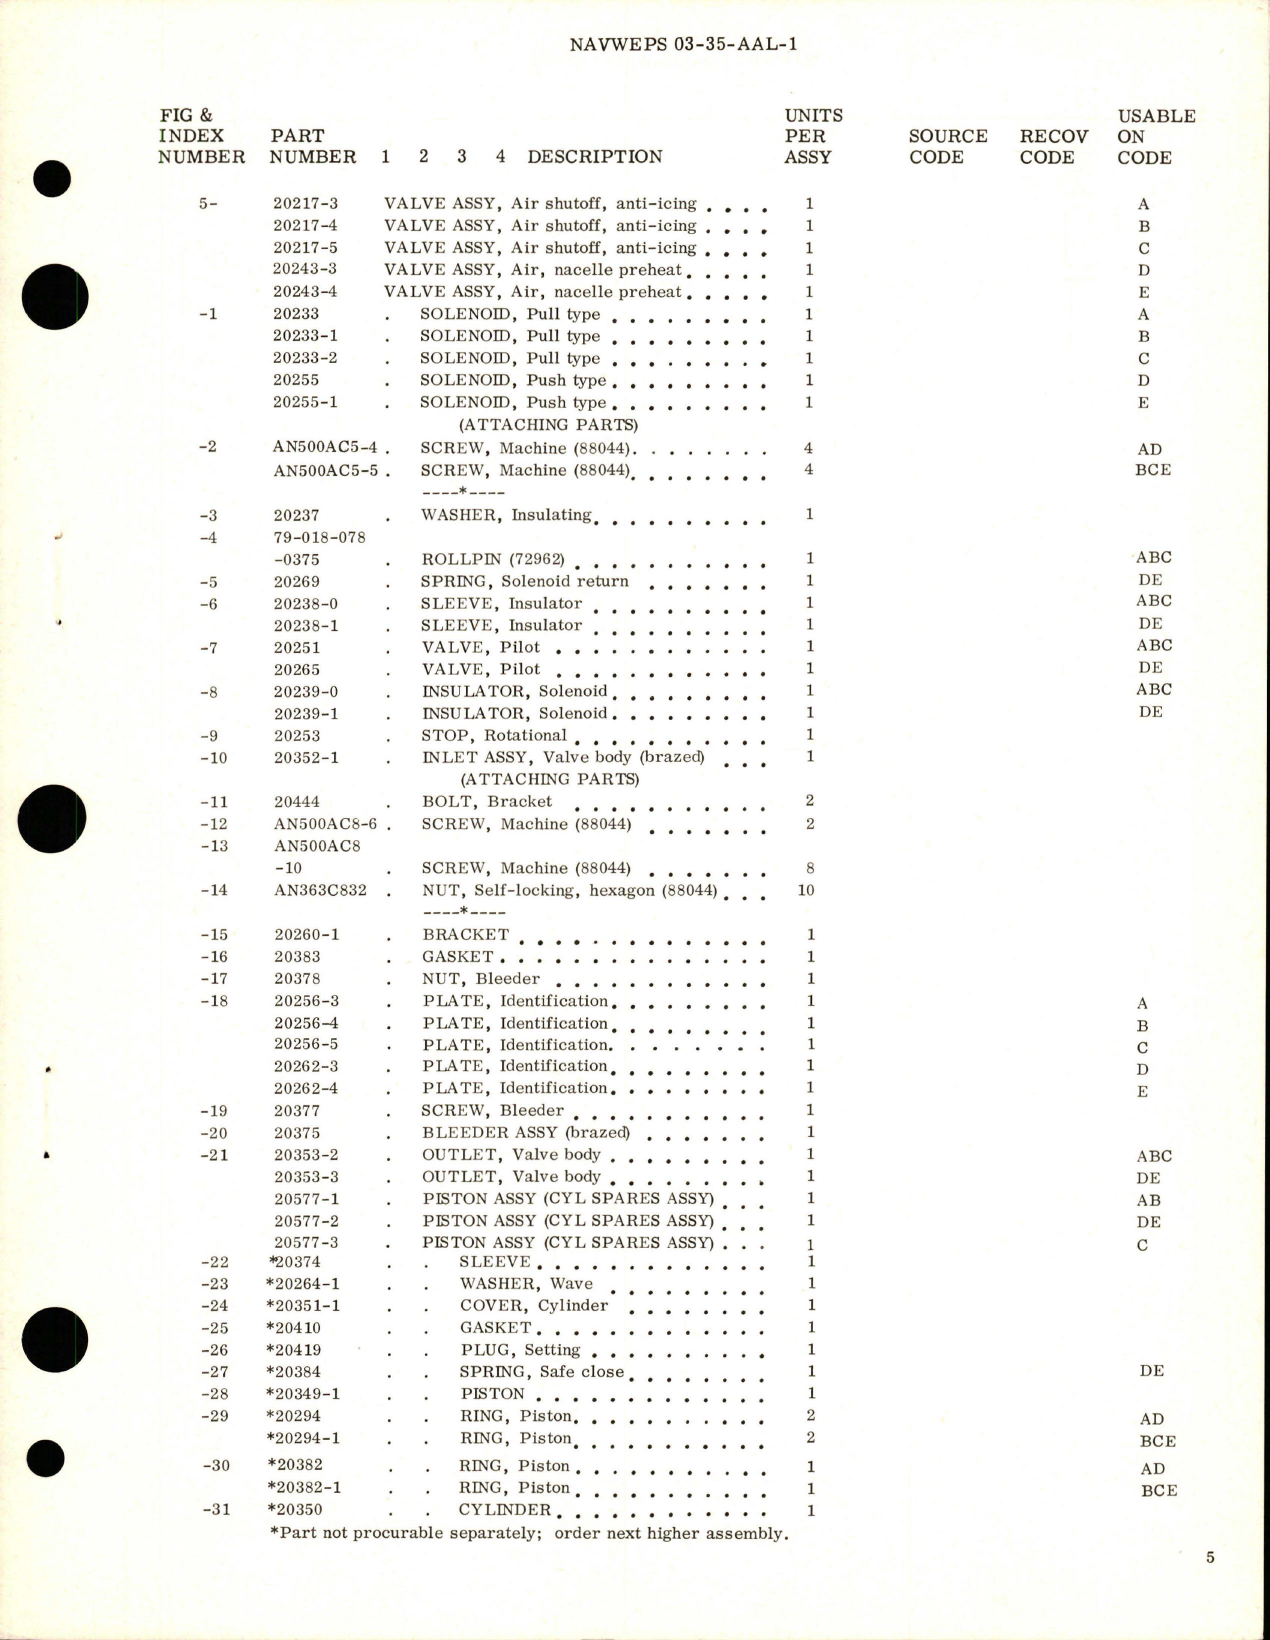 Sample page 5 from AirCorps Library document: Overhaul Instructions with Parts Breakdown for Anti-Icing Air Shutoff and Nacelle Preheat Air Valves